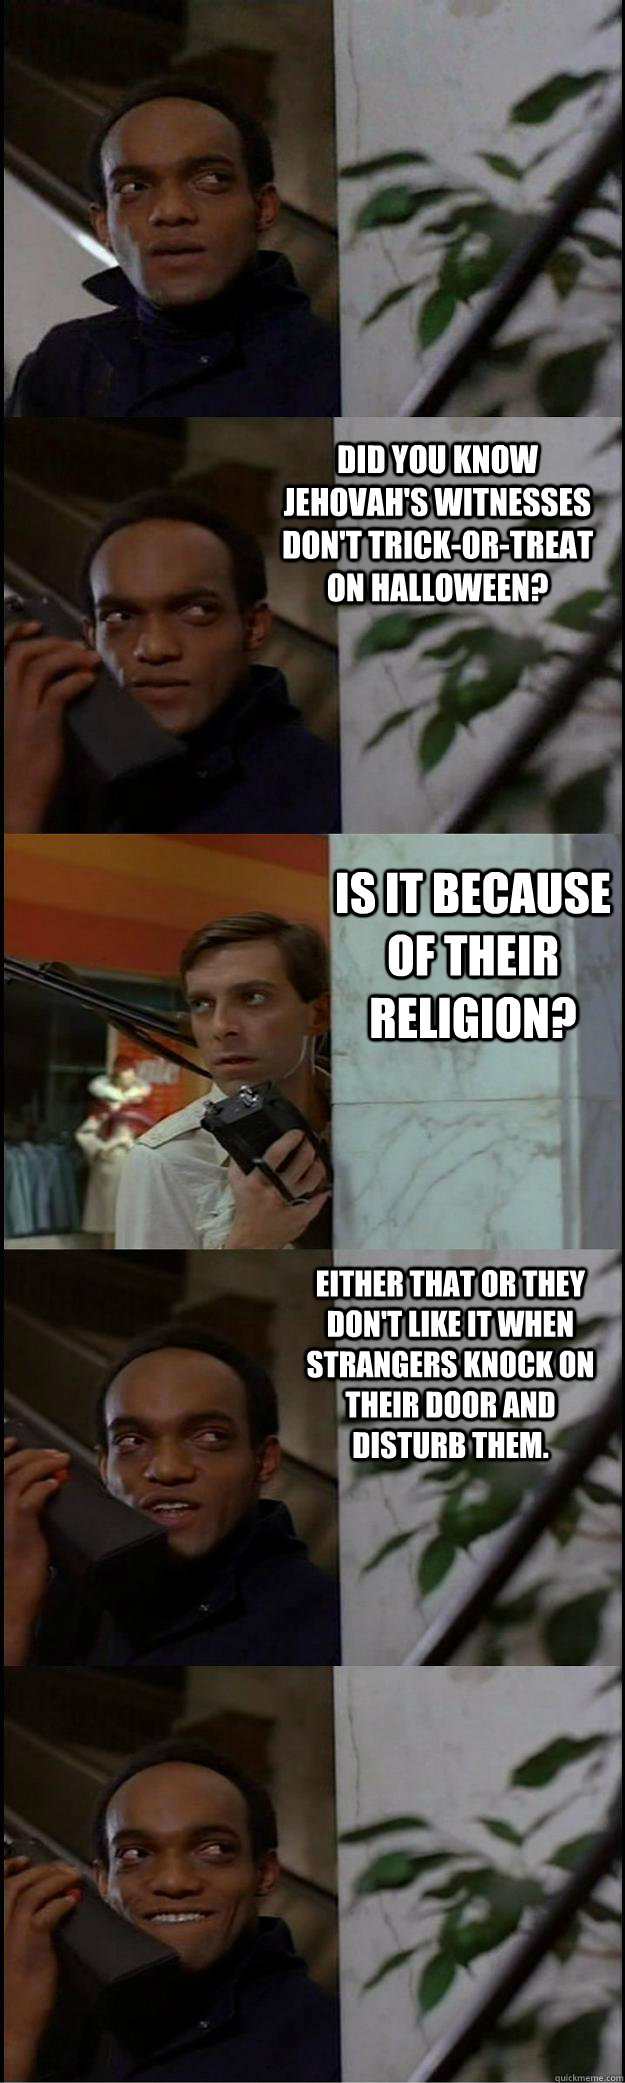 Did you know Jehovah's Witnesses don't trick-or-treat on halloween?  Is it because of their religion? either that or they don't like it when strangers knock on their door and disturb them.  Dawn of the Dead